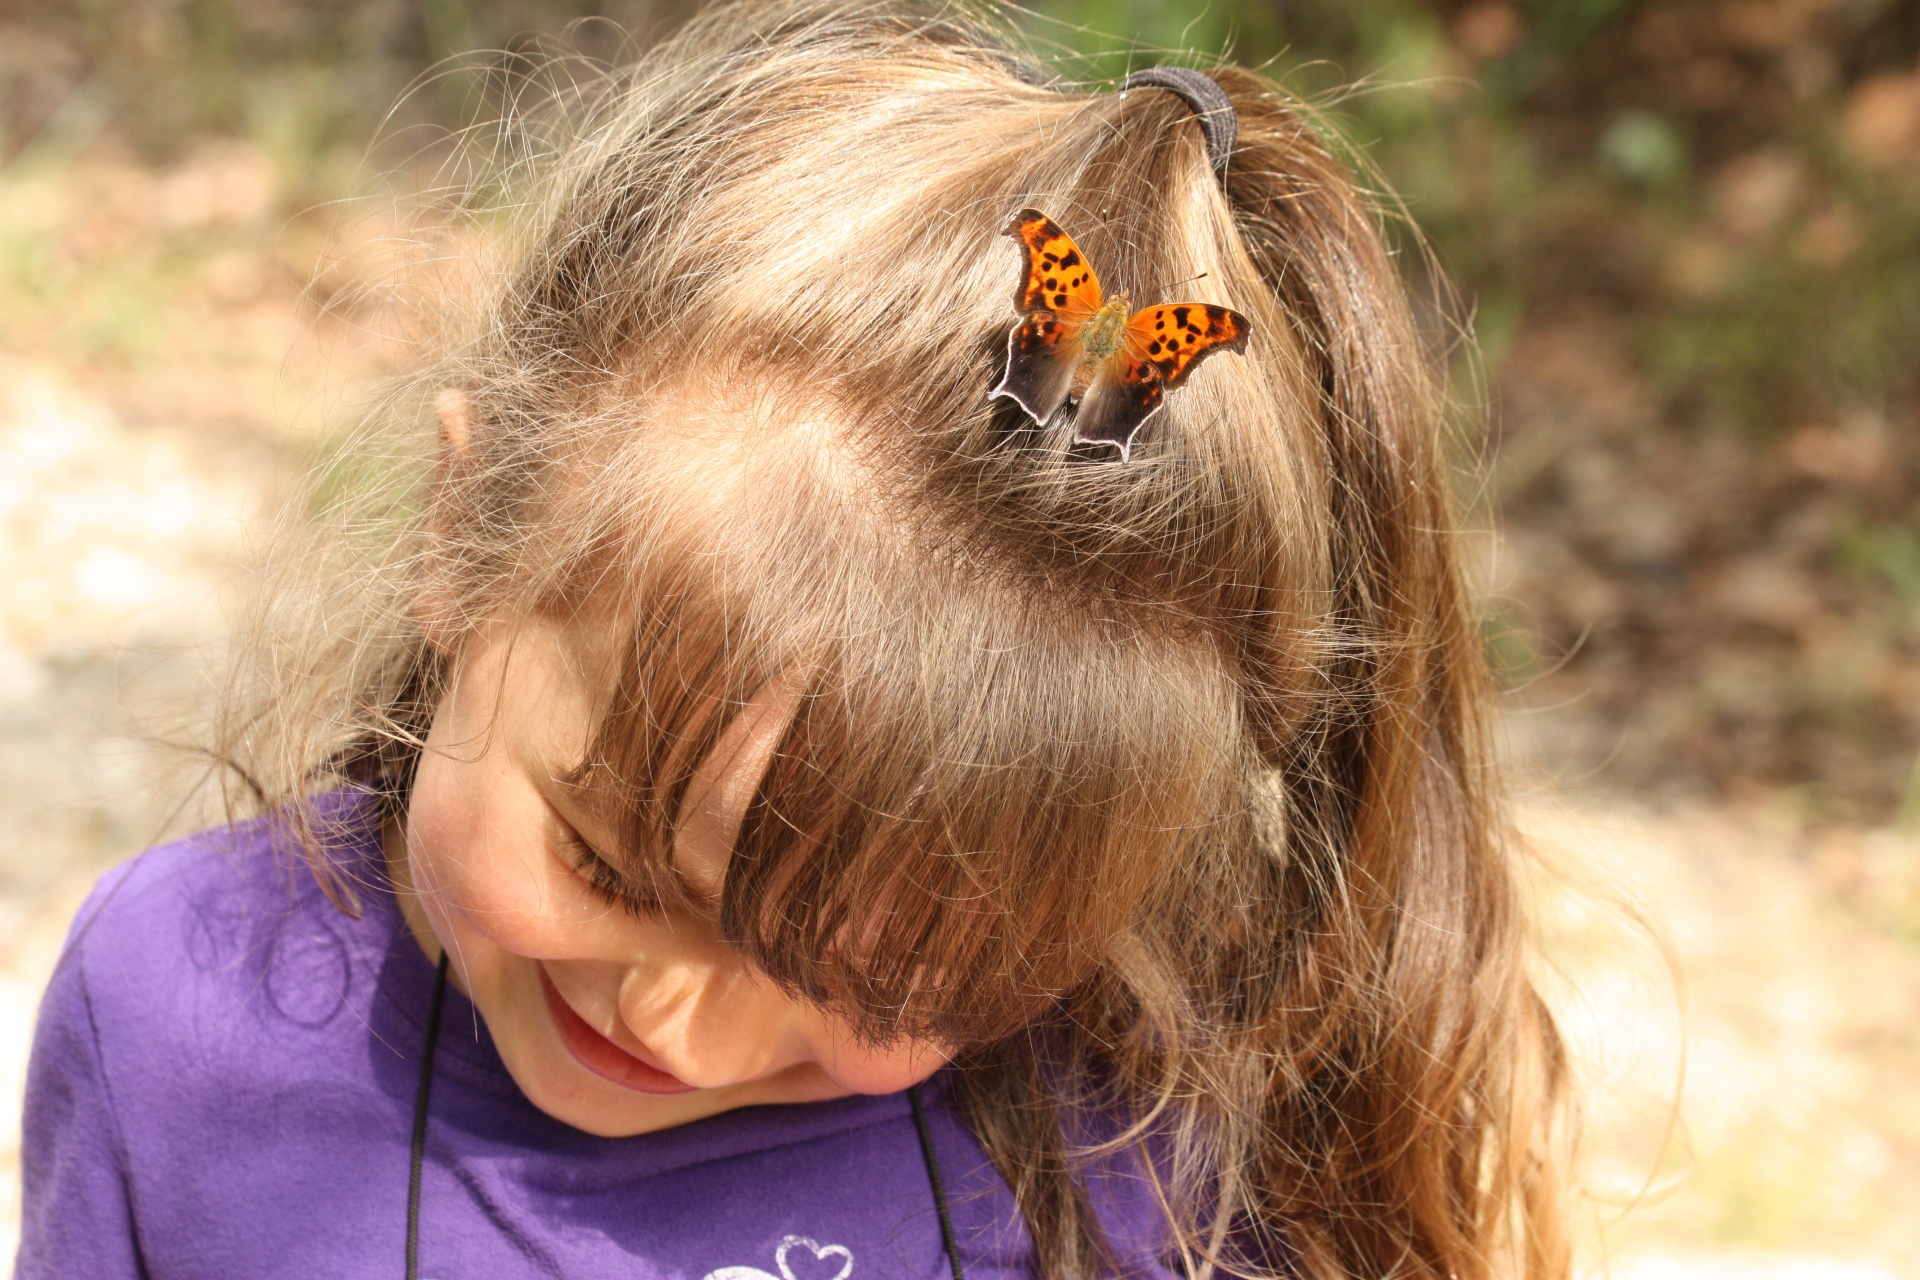 Butterfly On Child's Head